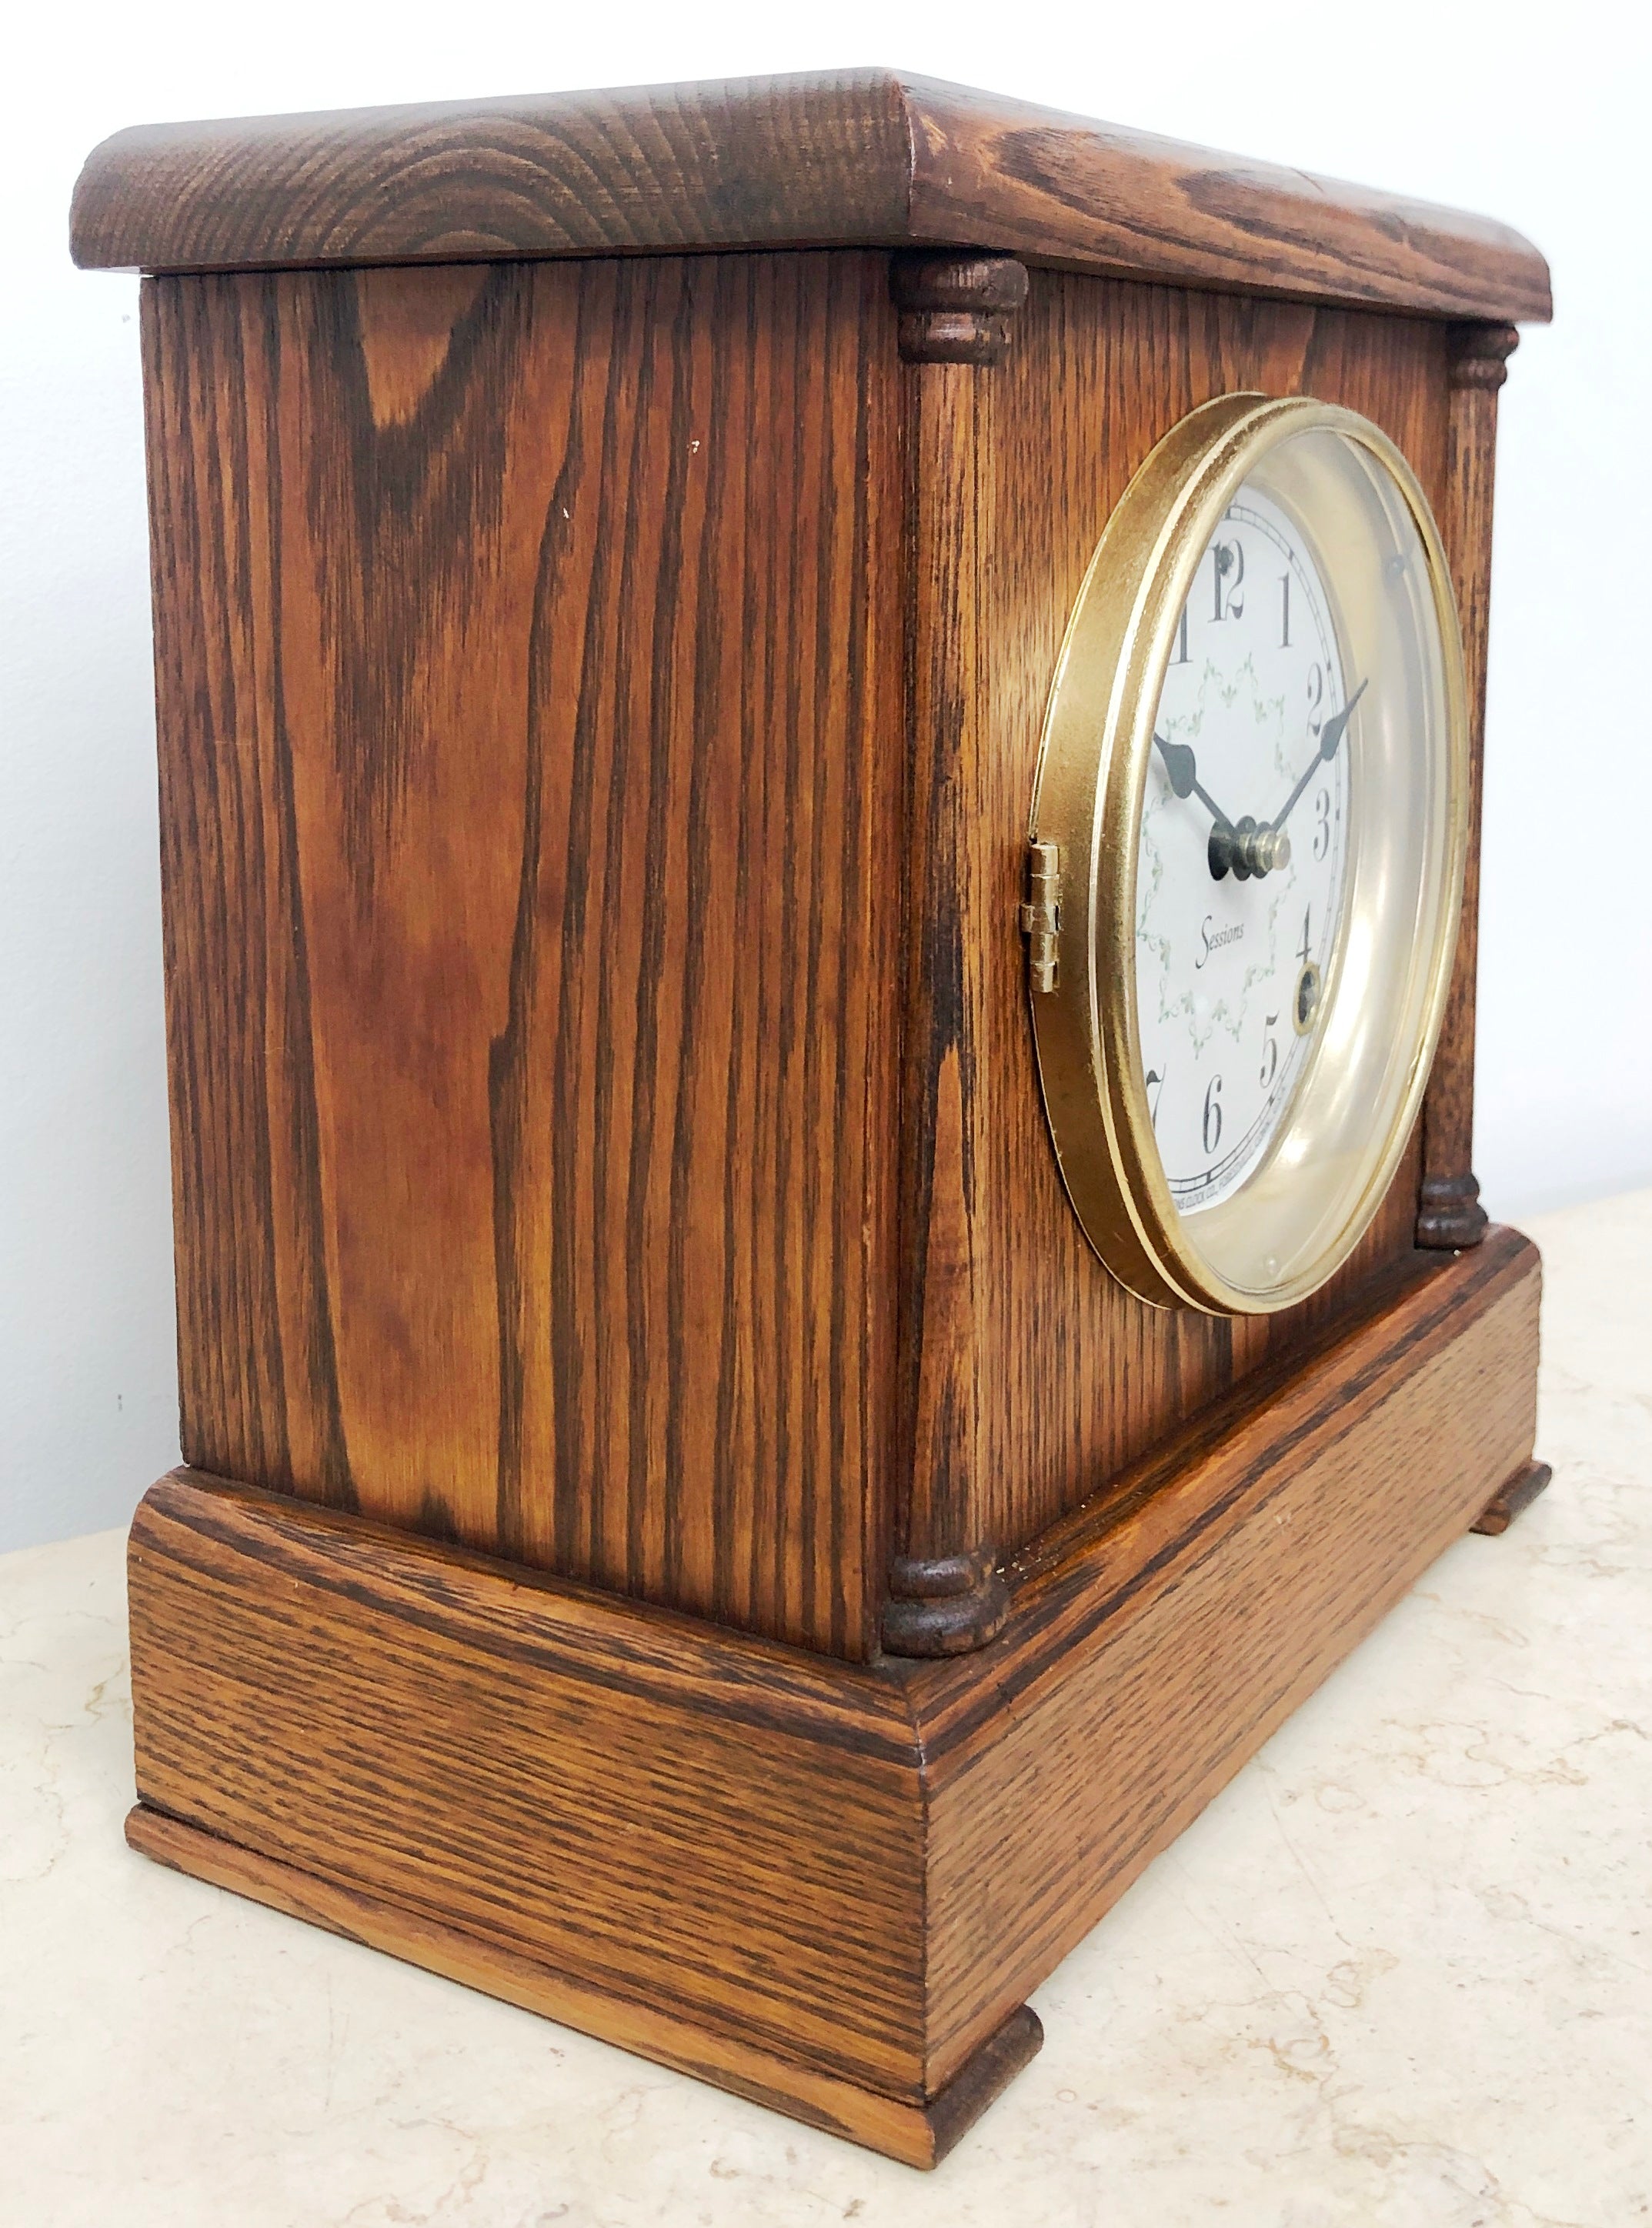 Antique Sessions Hammer Coil Chime Mantel Clock | eXibit collection